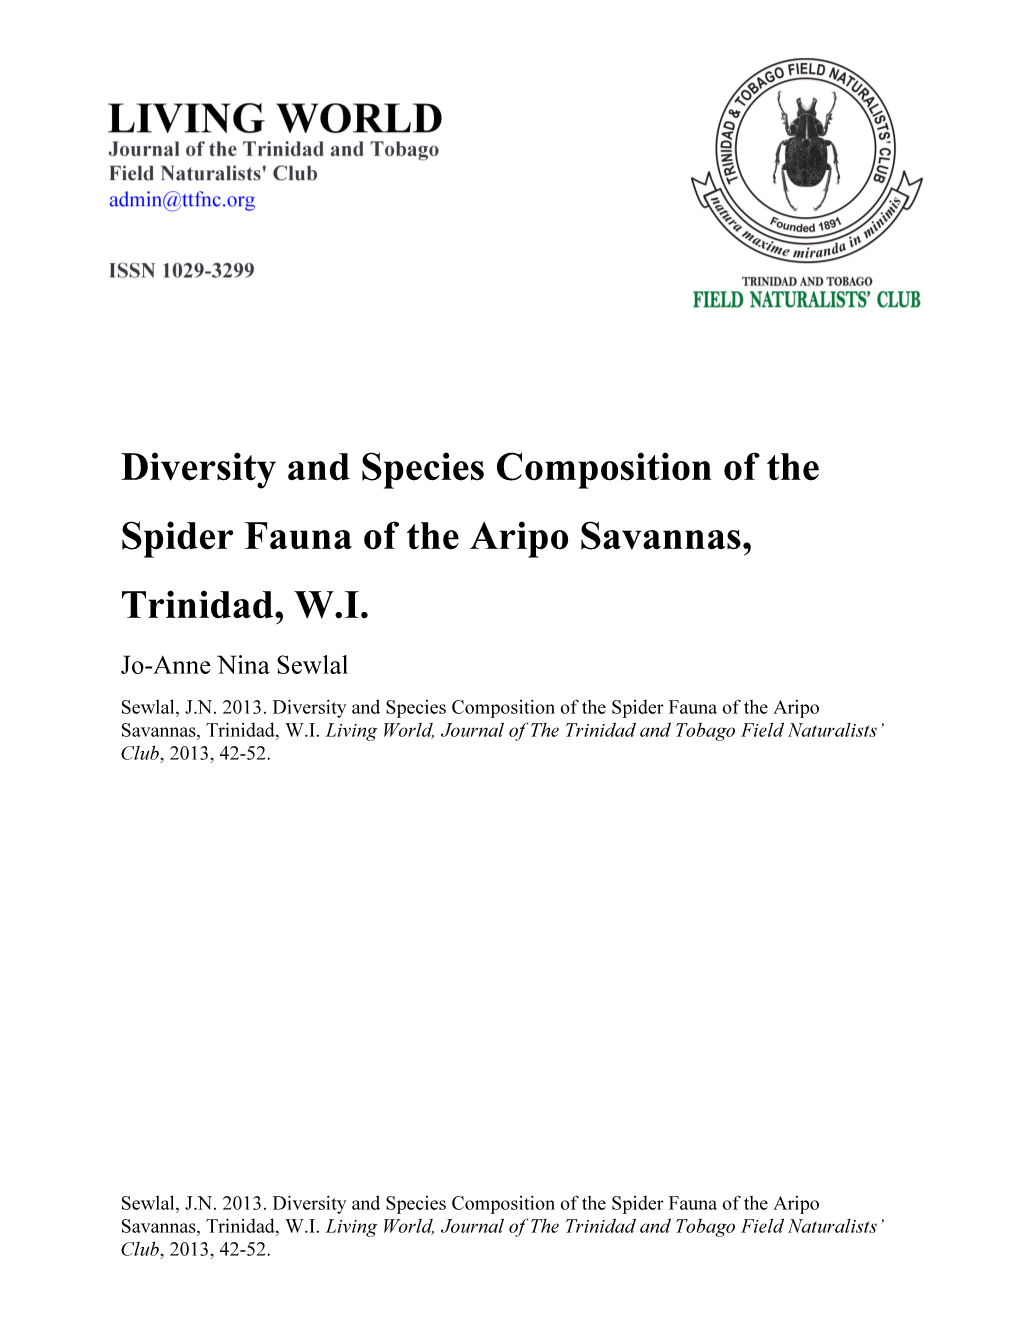 Diversity and Species Composition of the Spider Fauna of the Aripo Savannas, Trinidad, W.I